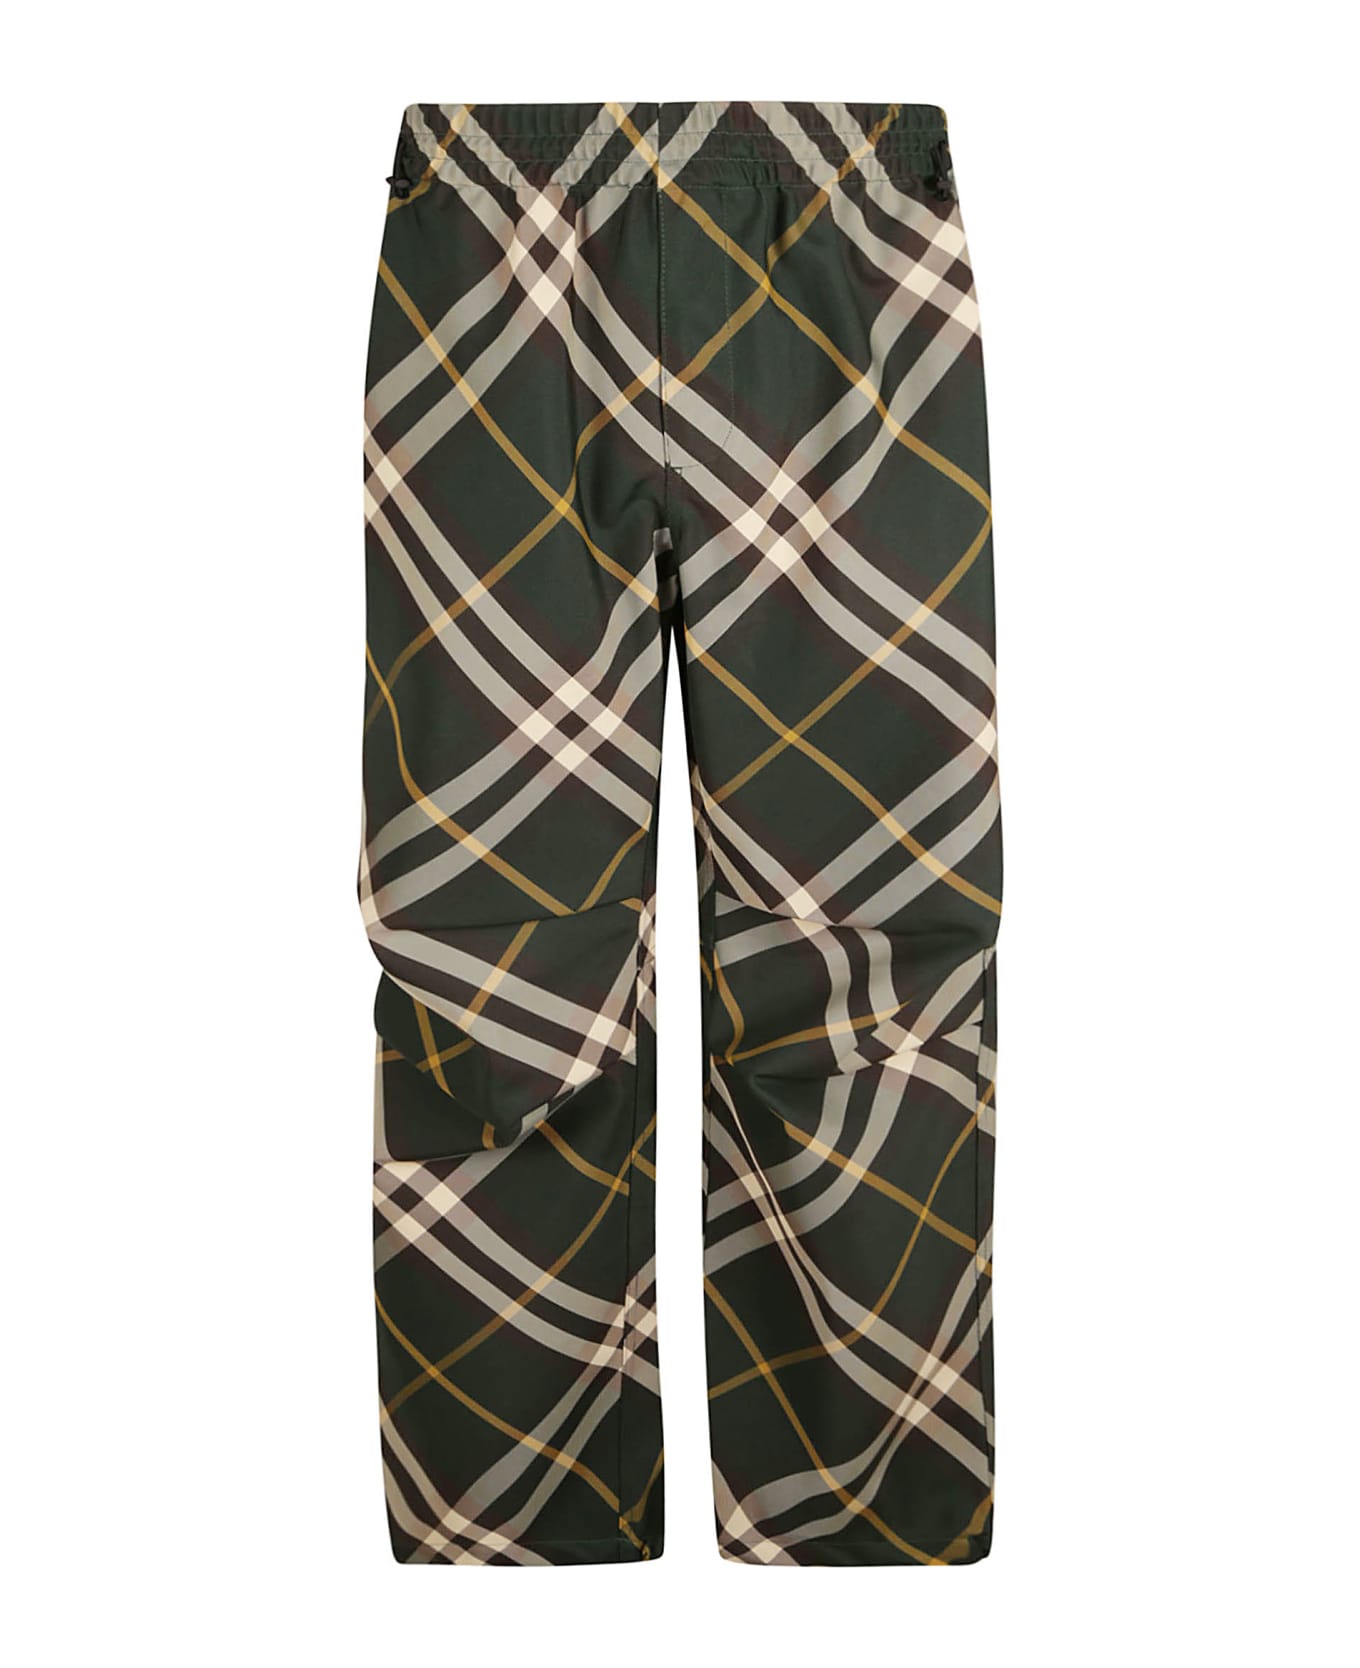 Burberry Elastic Waist Check Patterned Trousers - Ivy IP Check